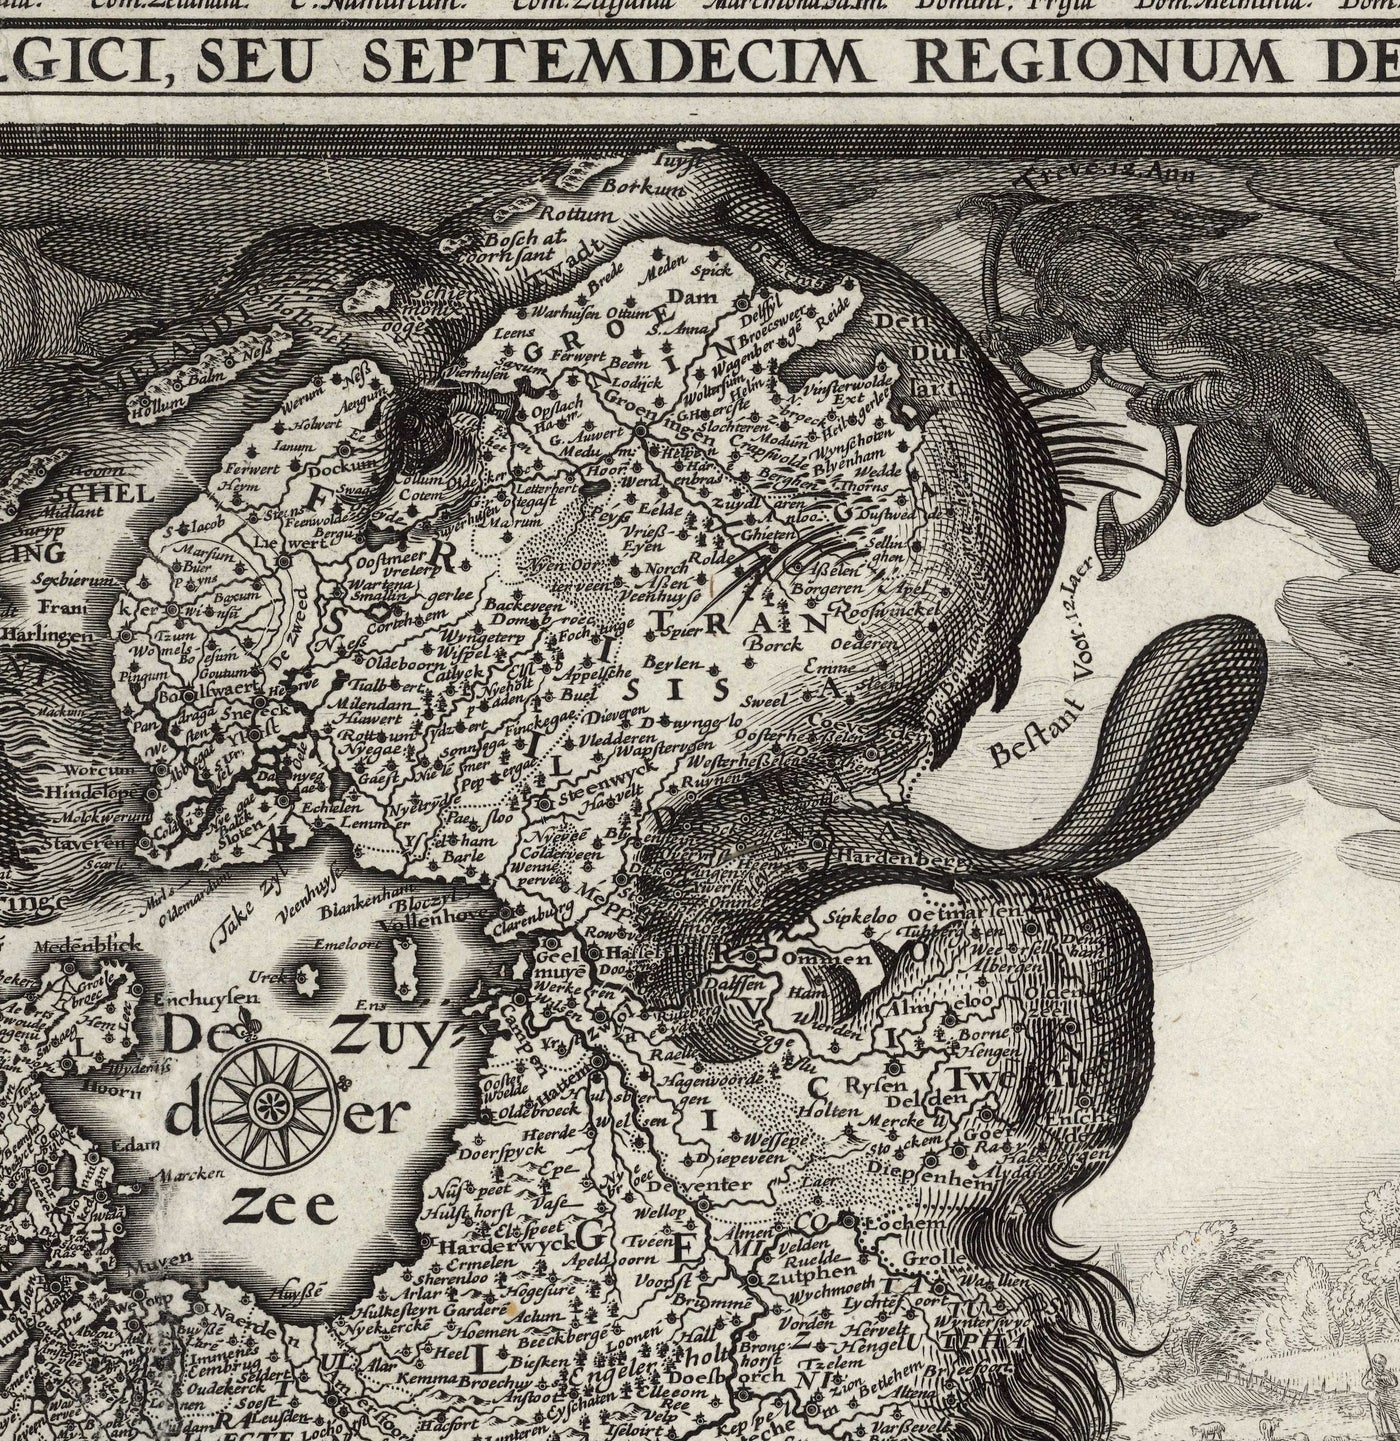 Old Leo Belgicus Map of the Low Countires in 1611 by C. Janszoon Visscher - Netherlands, Belgium, Brussels, Amsterdam, Genk